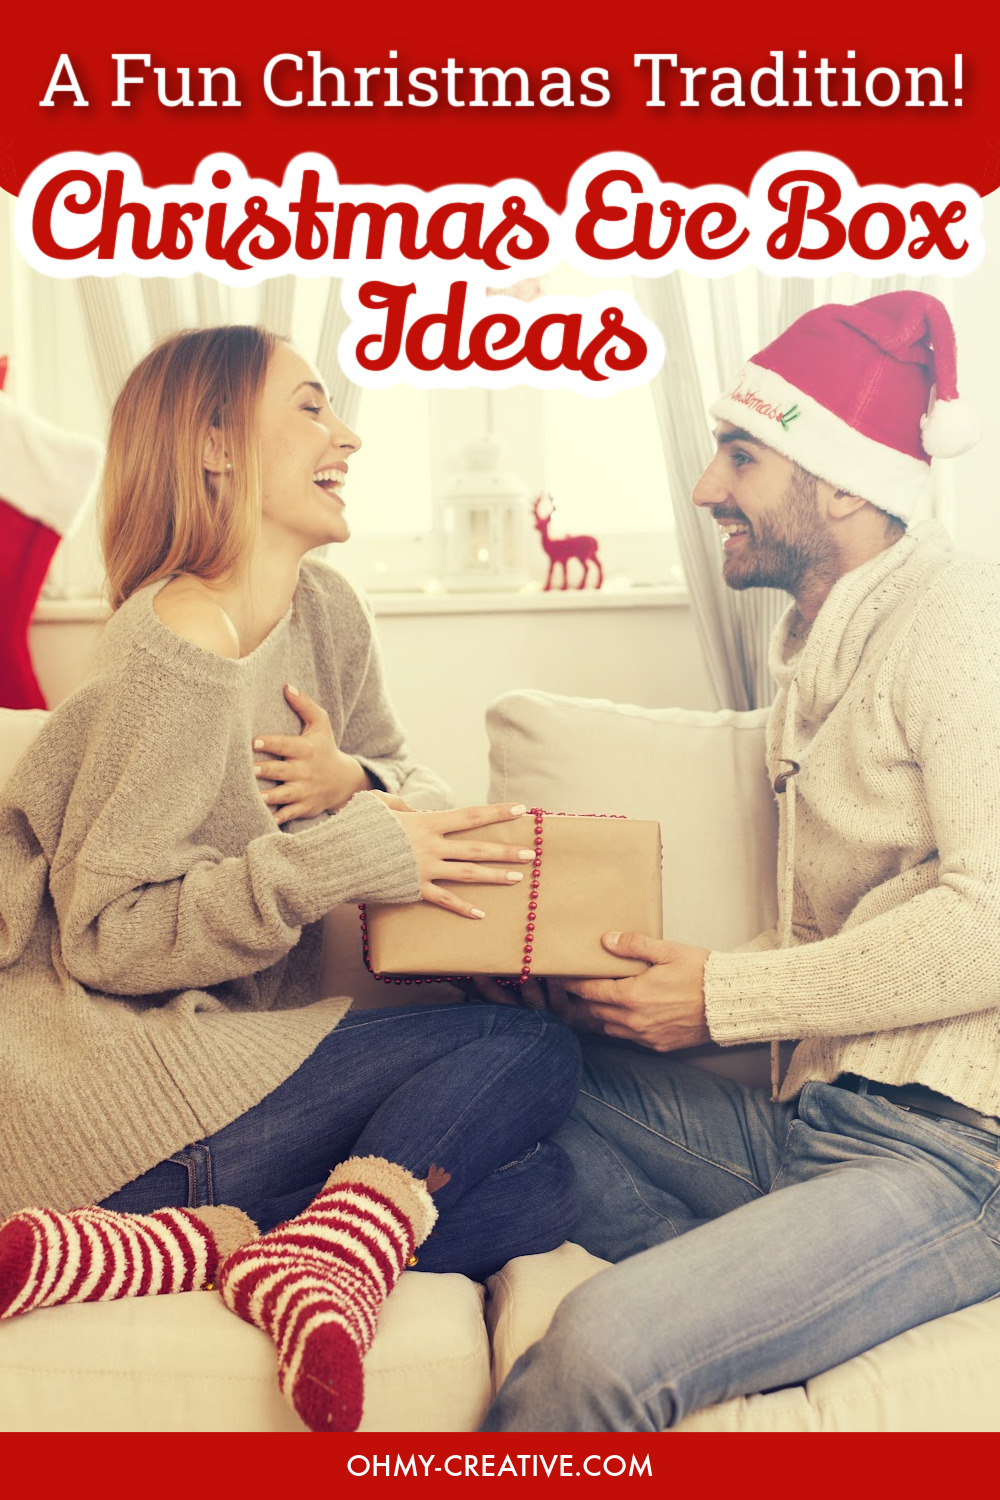 A man and women sitting on the couch laughing holding a Christmas Eve box gift.